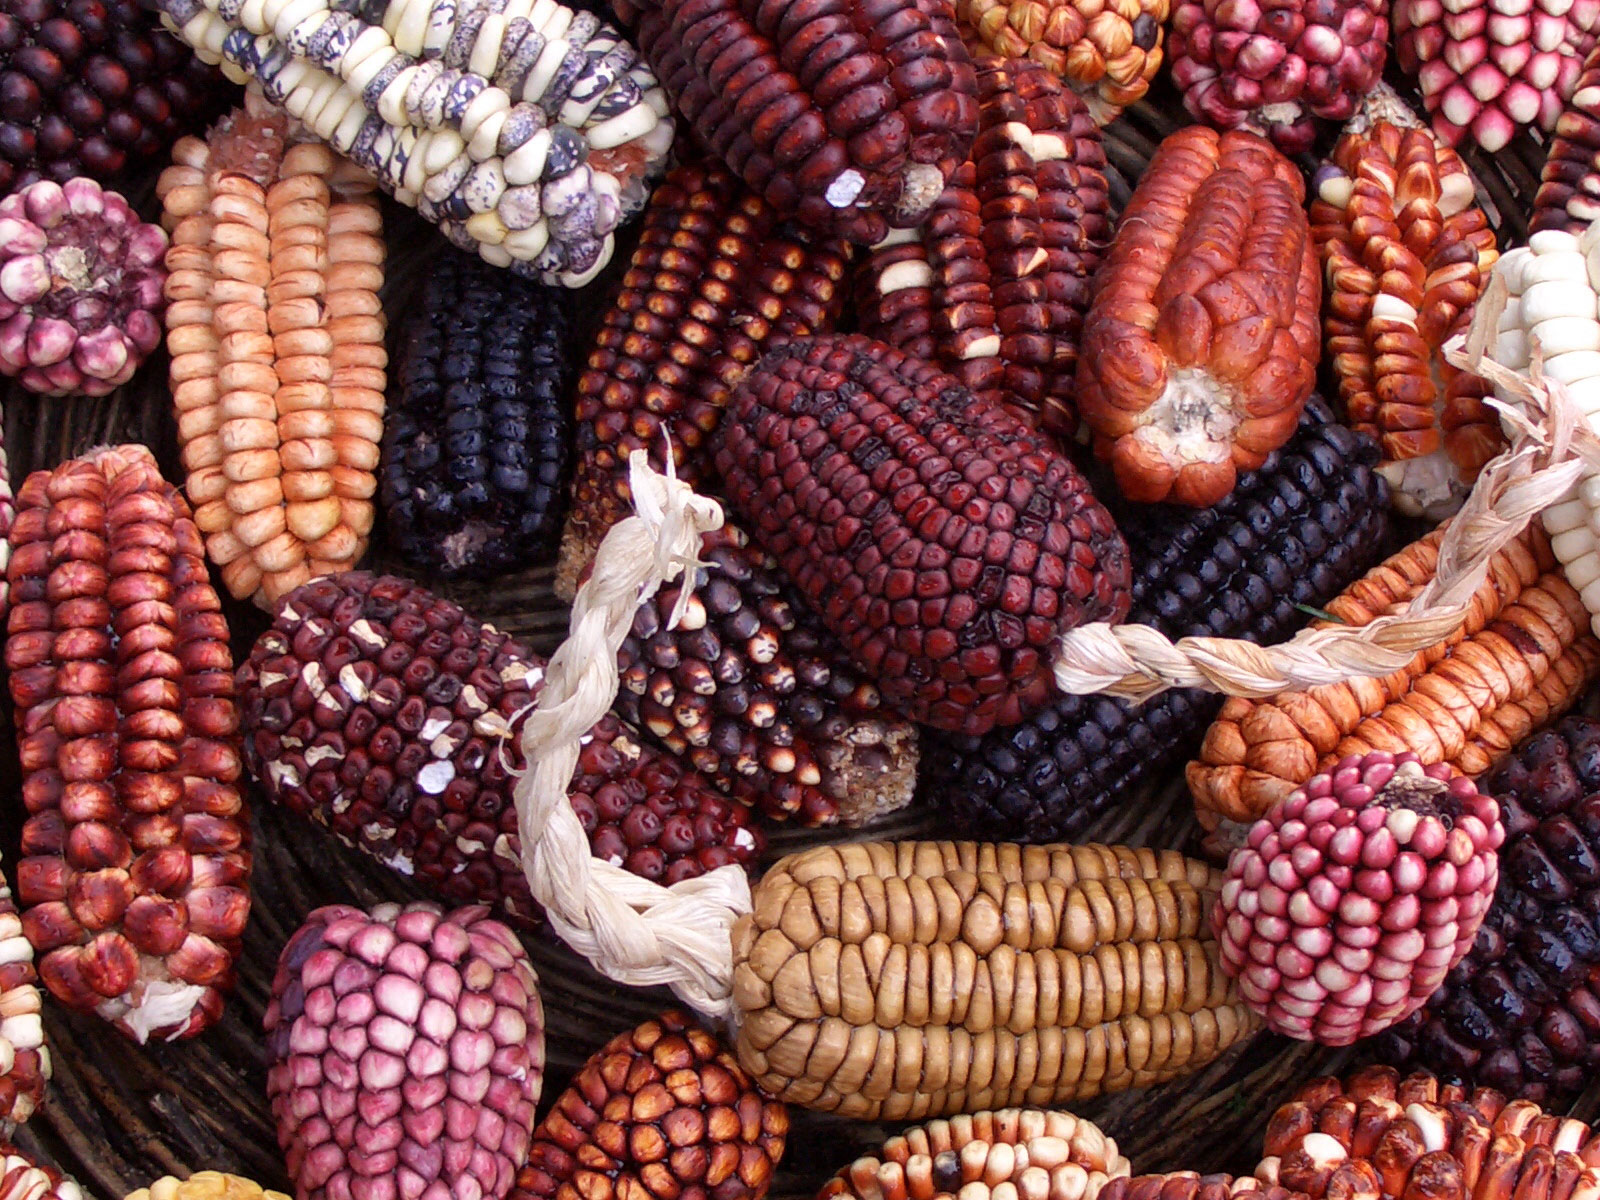 Photograph of ears of maize from Peru. The photo shows relatively short ears of maize with kernels in a variety of colors, ranging from light brown to orange to pink to deep red.